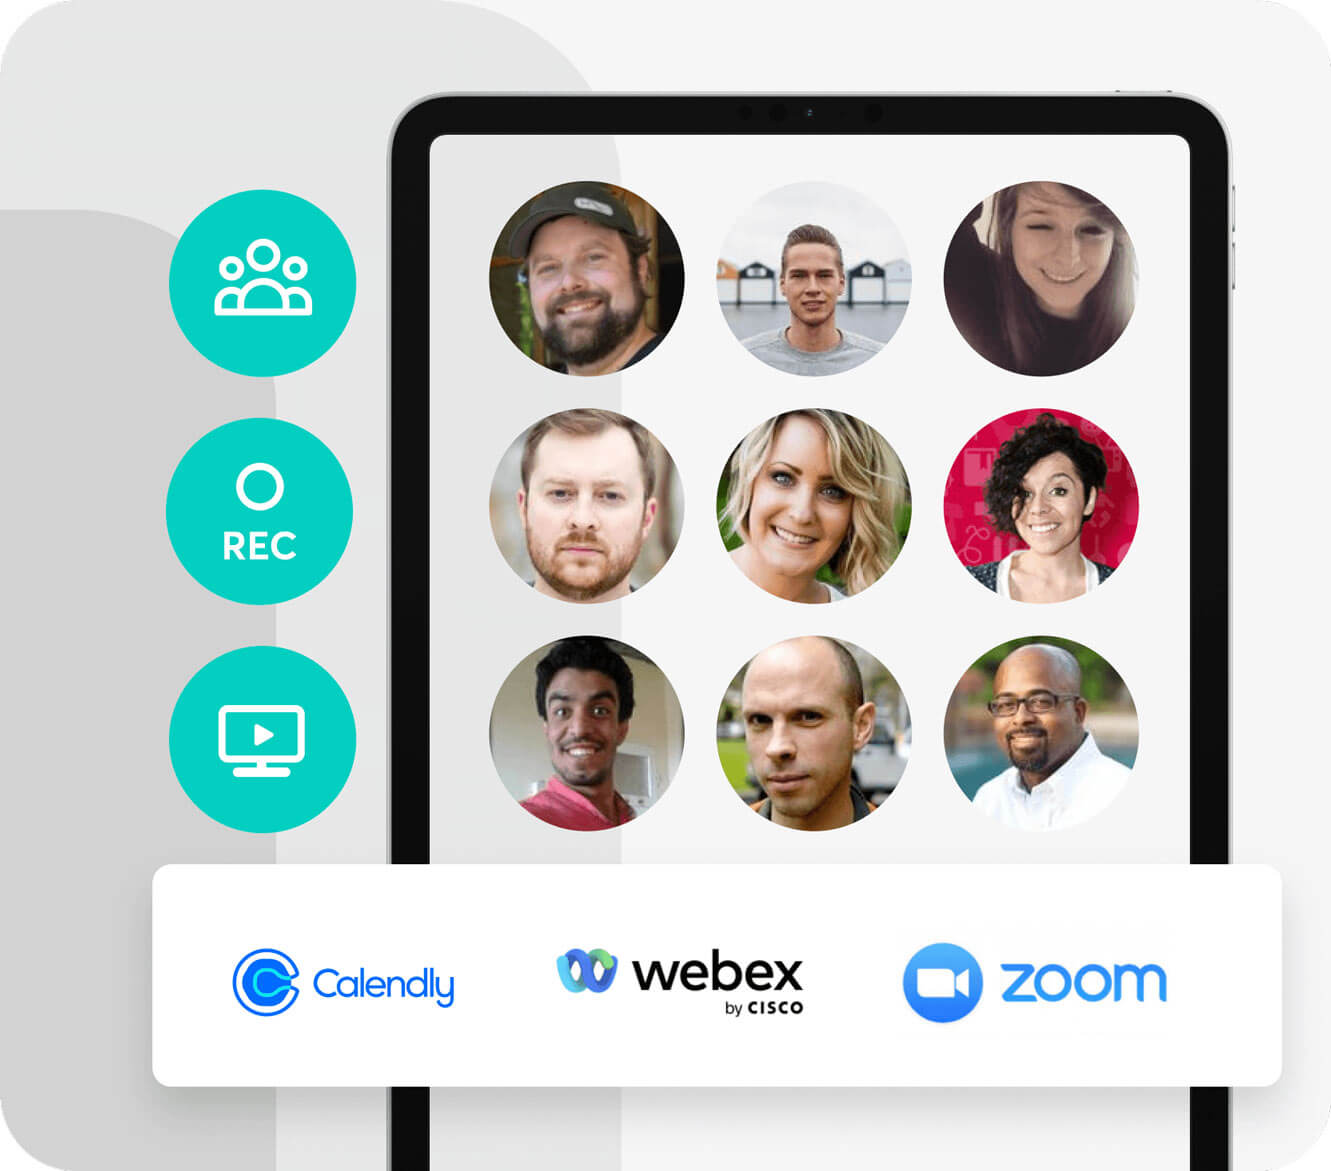 Options to setup live sessions and video coaching like Calendrly, Webex, and Zoom integrations.